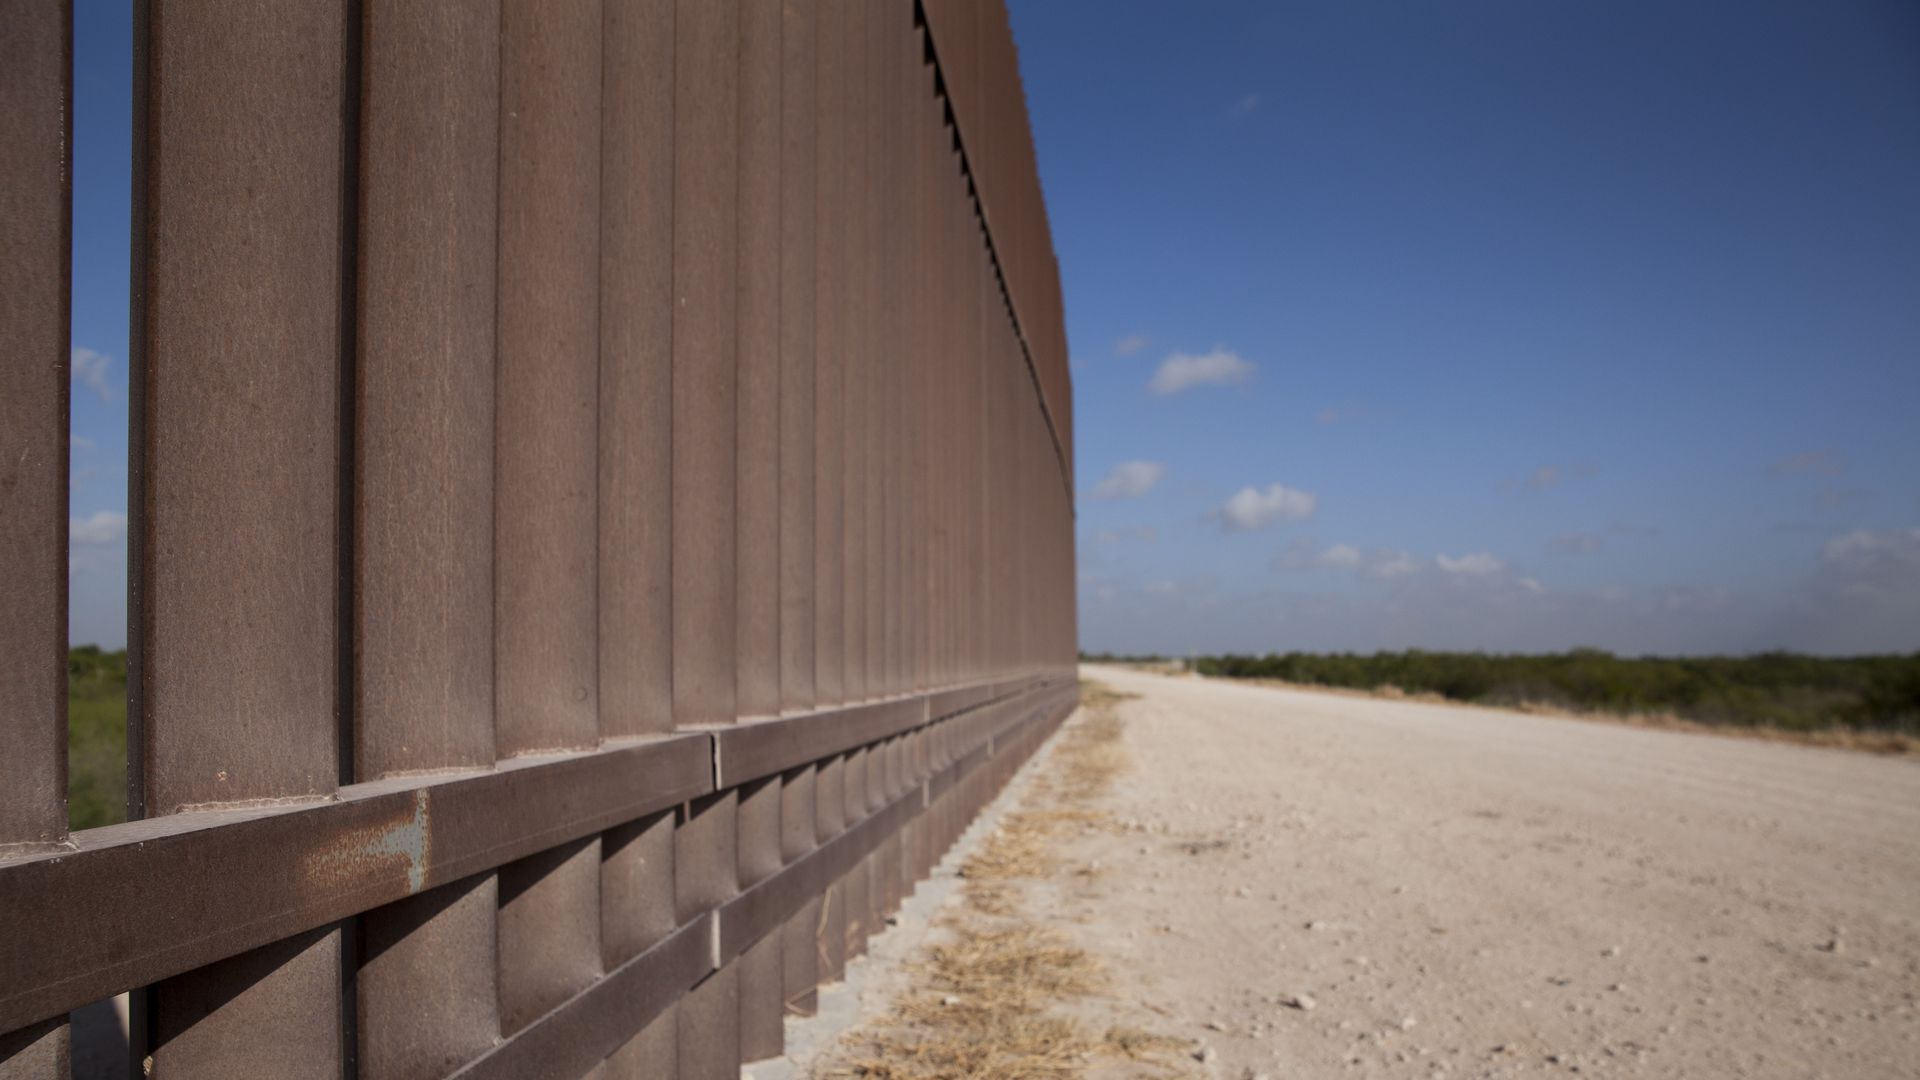 A section of the border wall